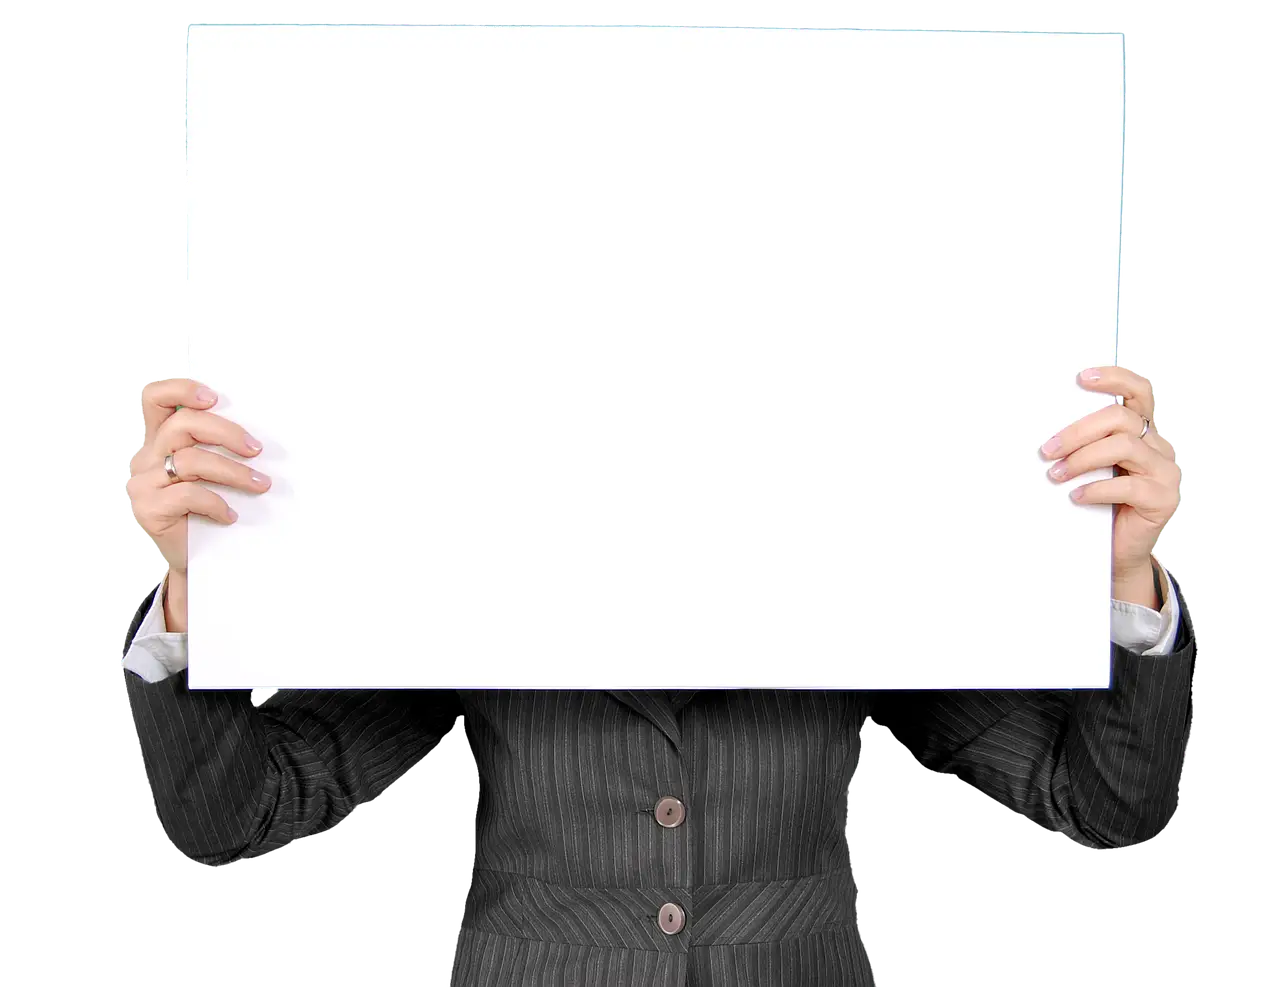 Man holding blank sign with no message